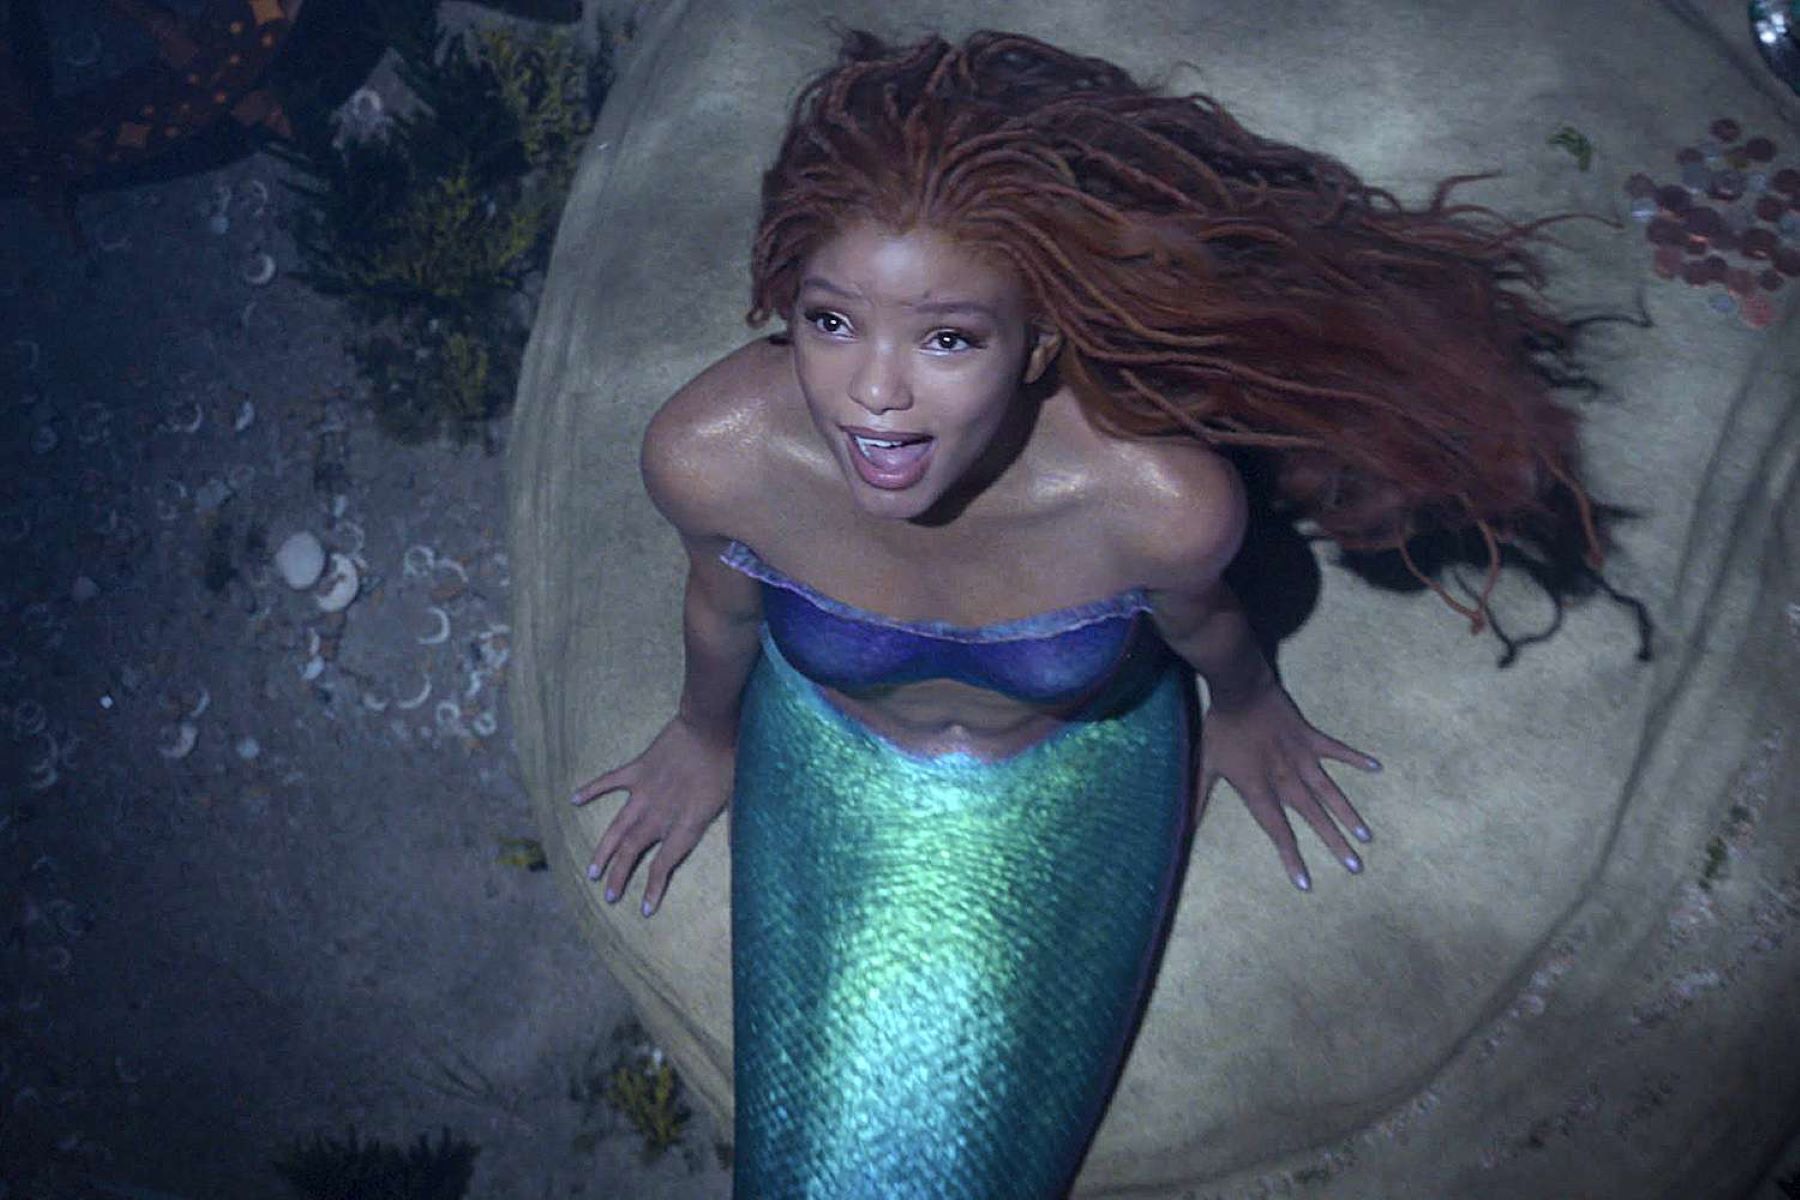 Controversy Erupts Over Flounder’s Portrayal In Live Action ‘Little Mermaid’ Adaptation